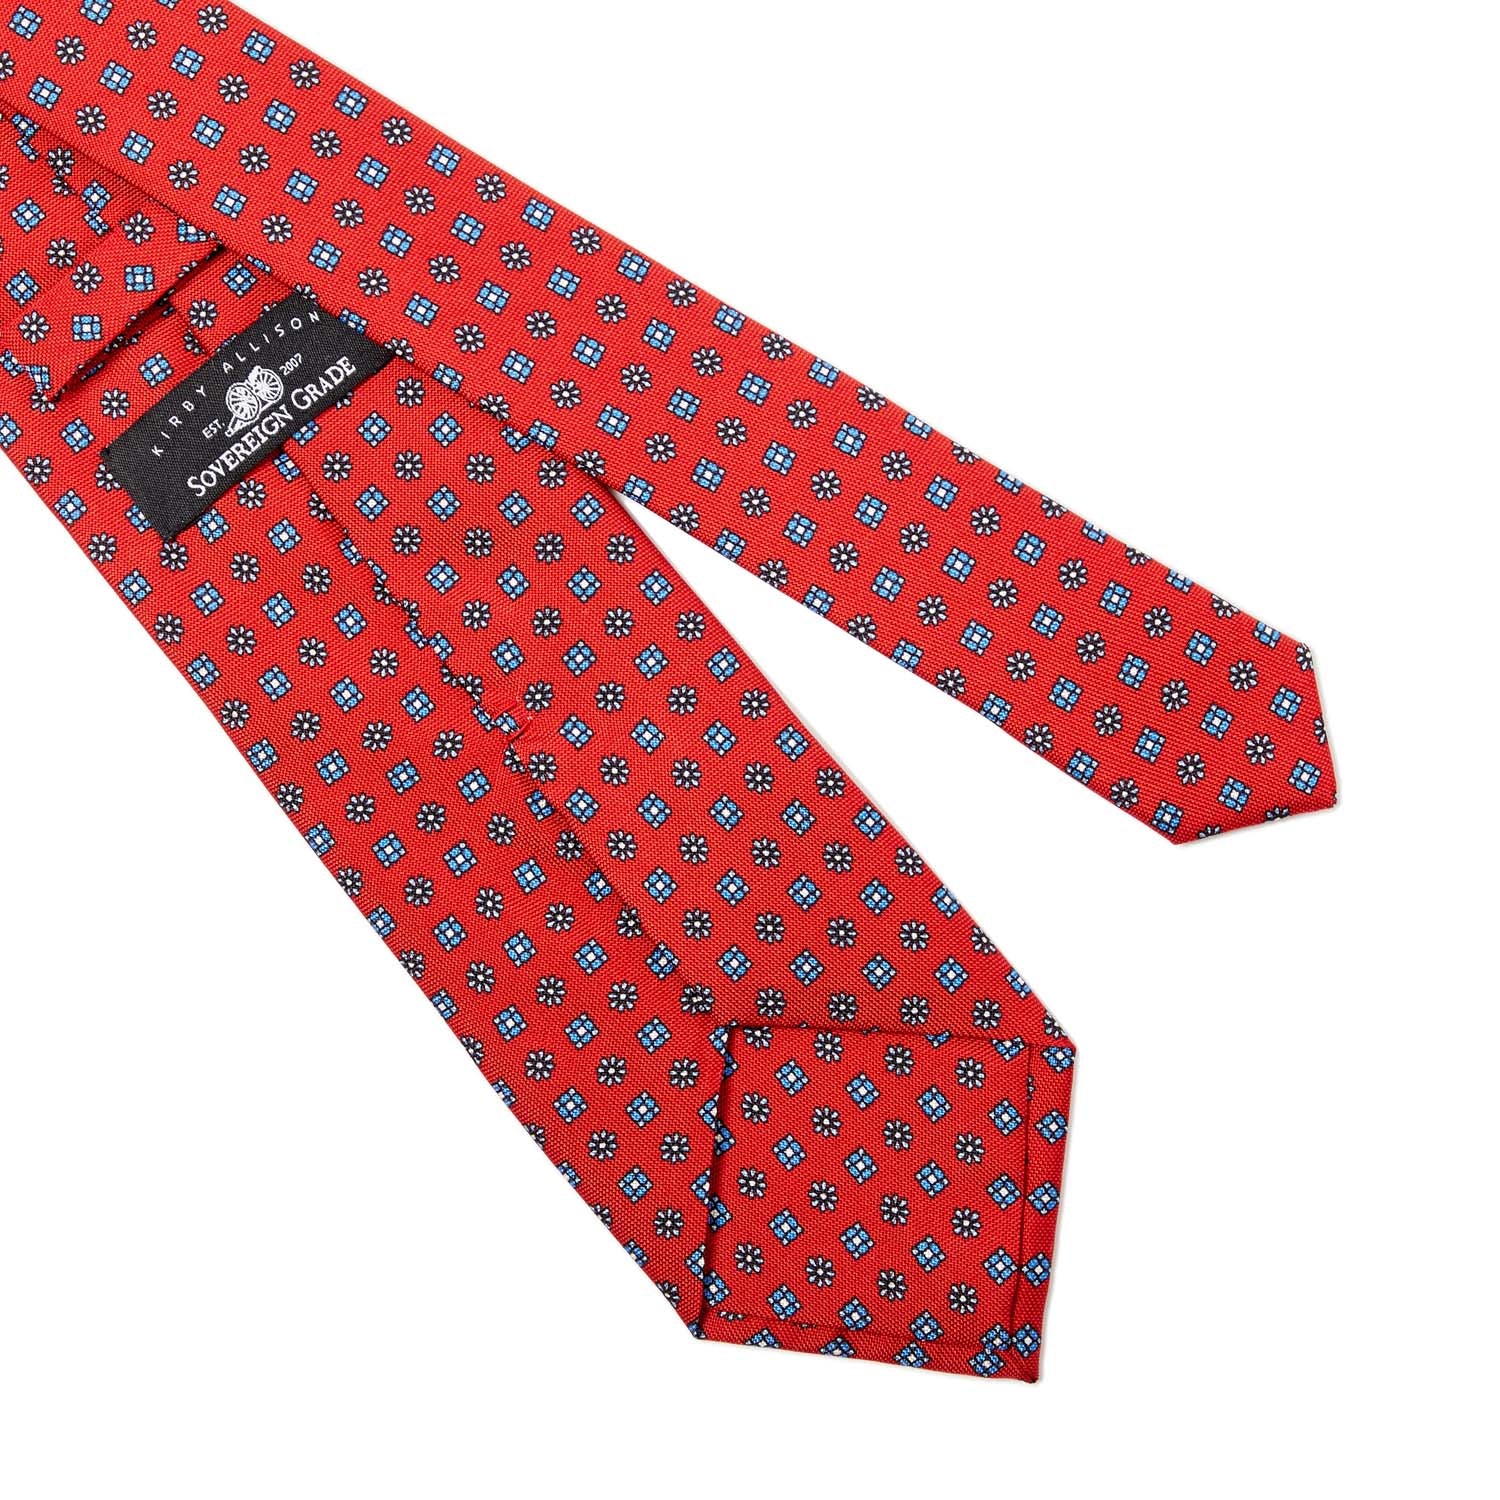 A Sovereign Grade Red Floral 25oz Silk Hopsack Tie with blue dots known for its quality by KirbyAllison.com.